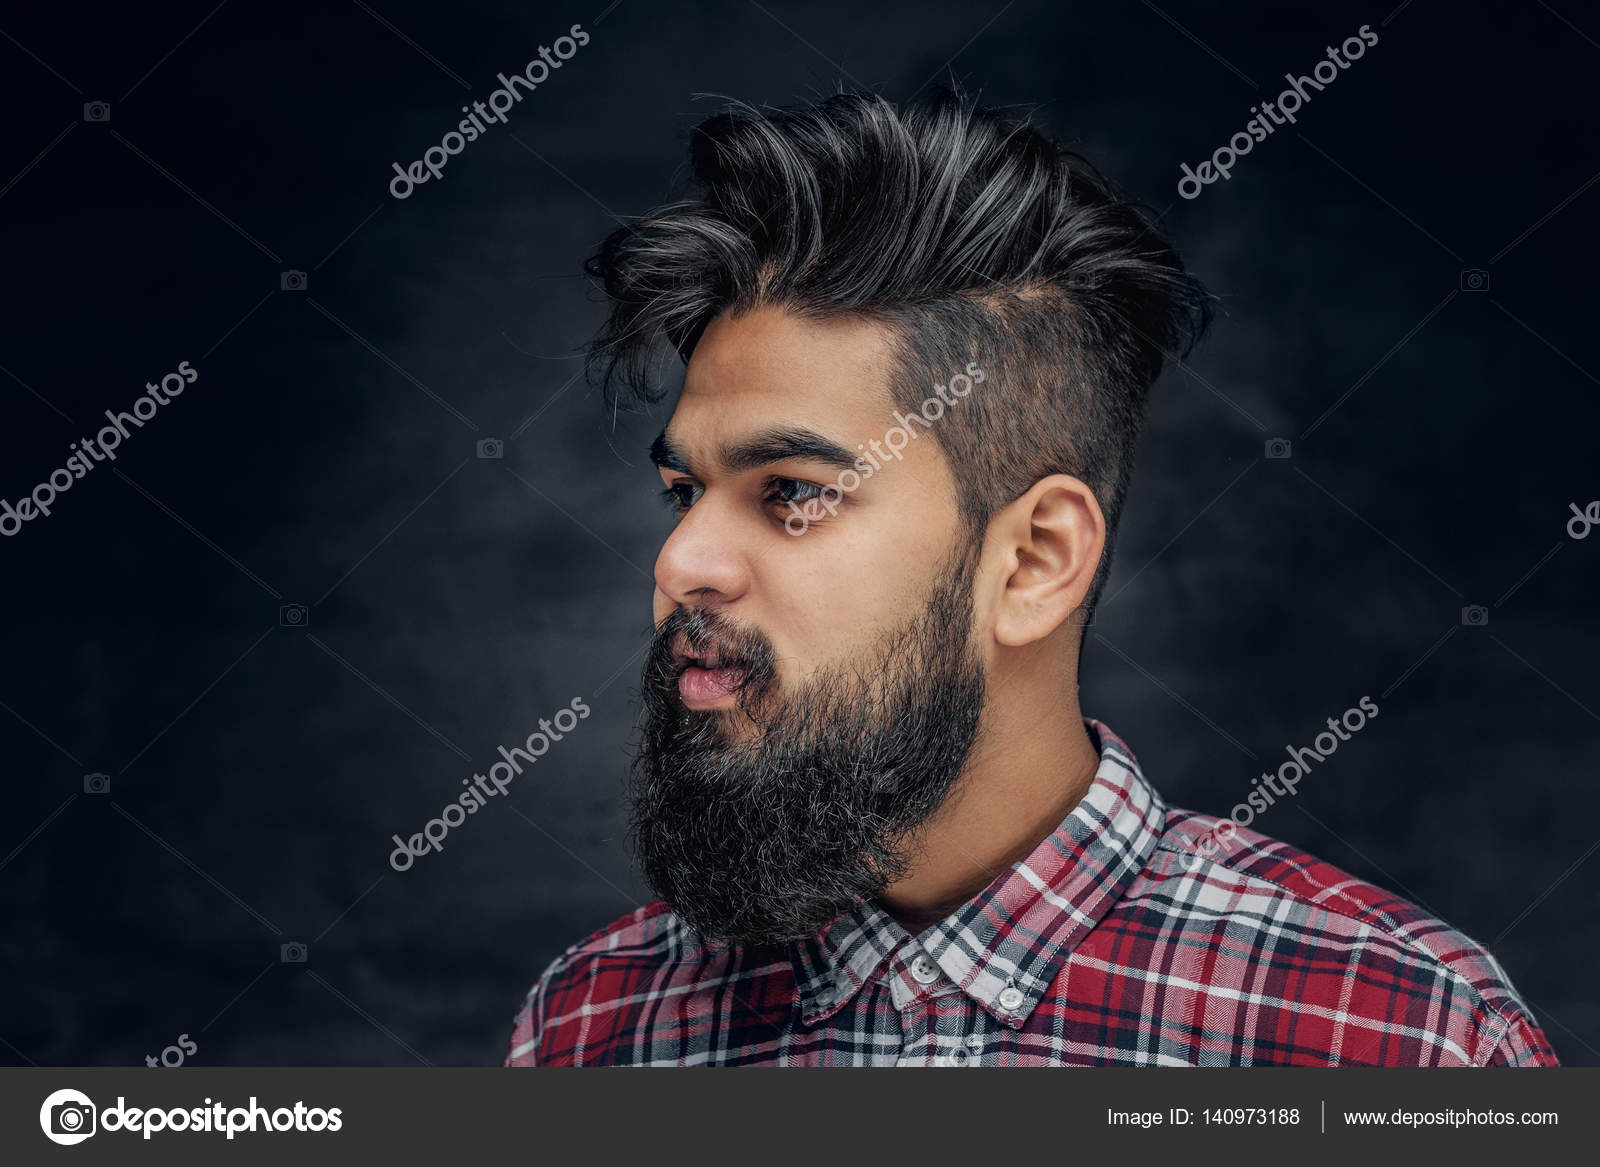 20 Patchy Beard Styles For Indian Men | Tips & Styling Ideas | Popular beard  styles, Beard styles, Patchy beard styles